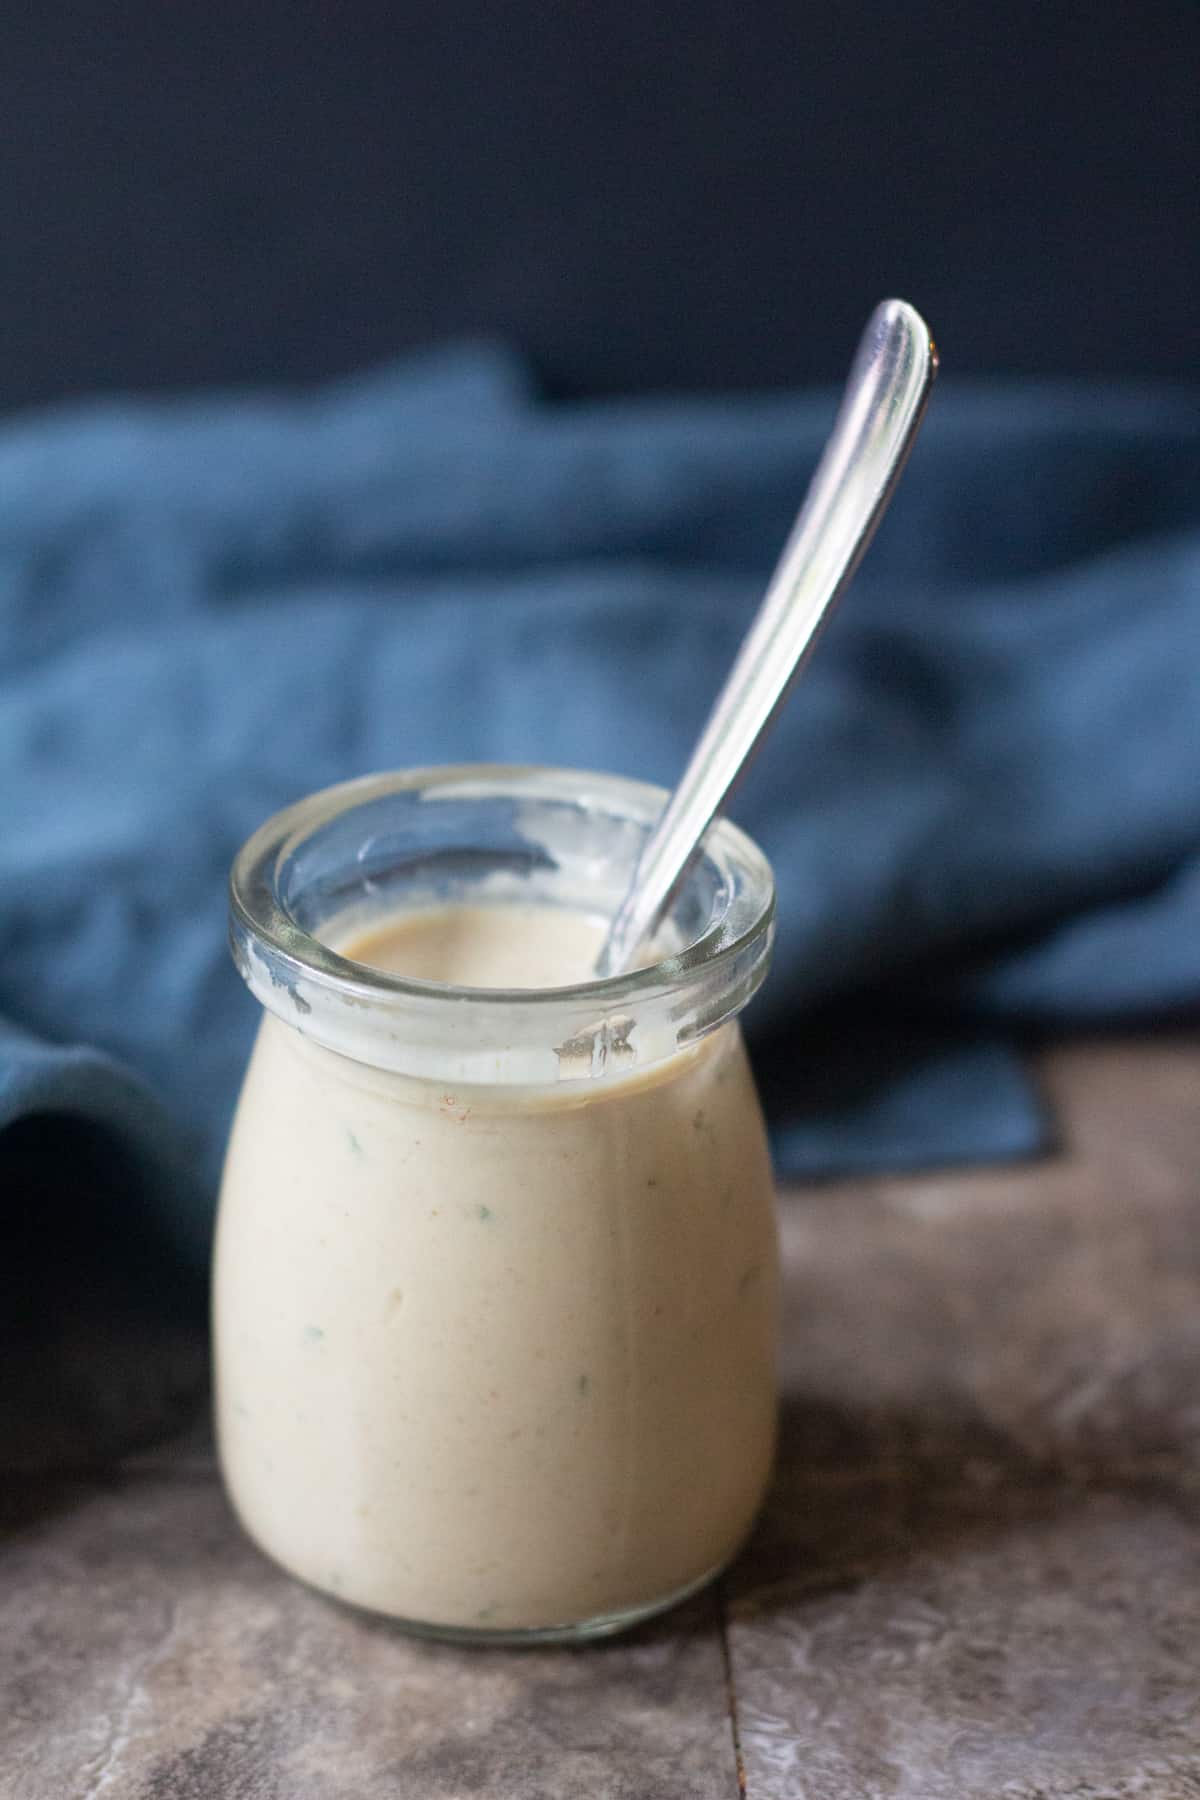 An easy everyday tahini sauce recipe that's perfect for falafel, shawarma and kabobs. You can make a big batch of this easy Middle Eastern sauce and always have it at hand.